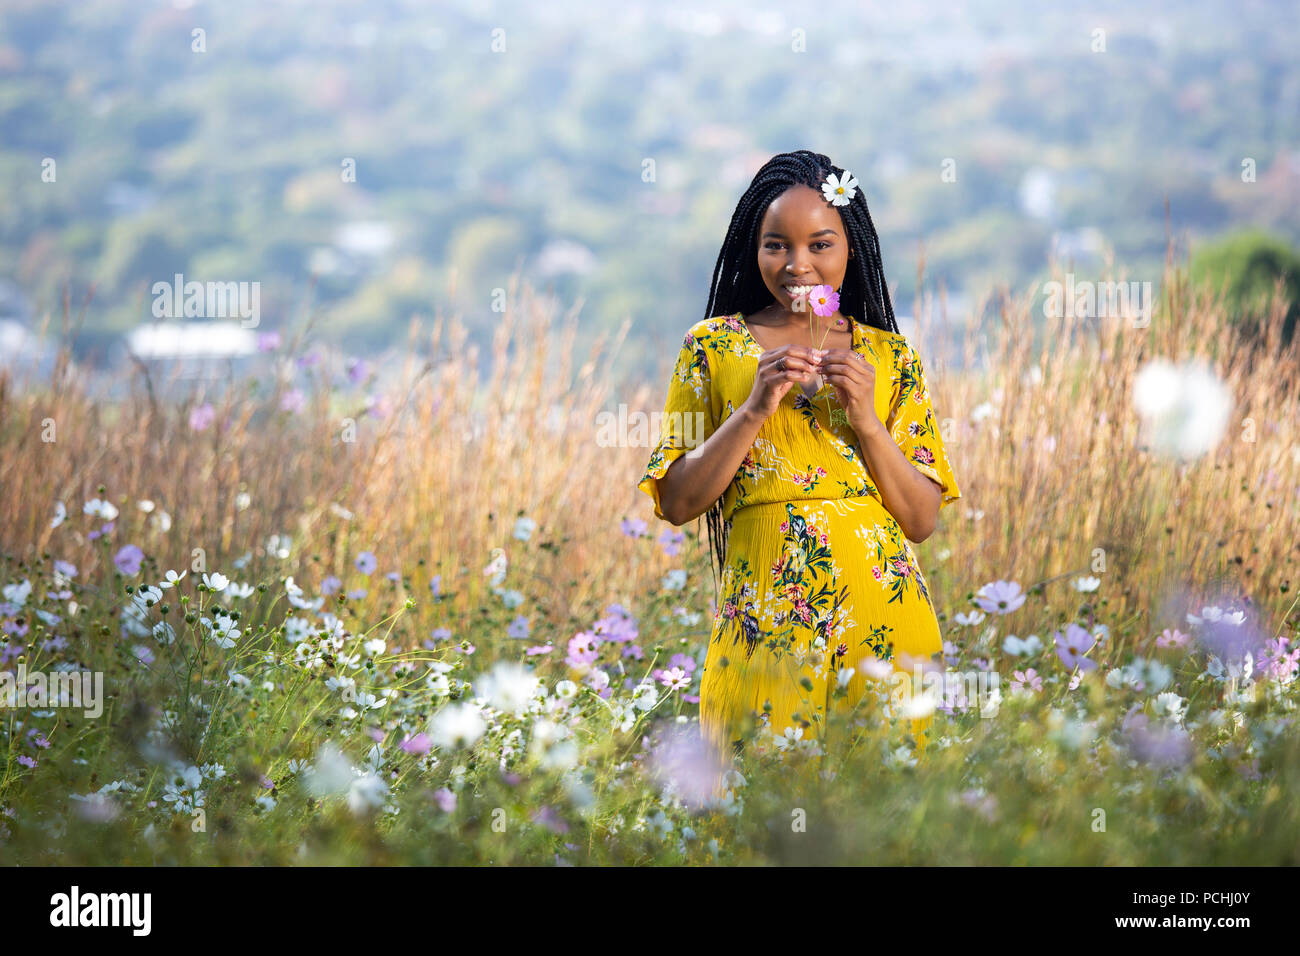 Young African woman holding a flower in a field Stock Photo